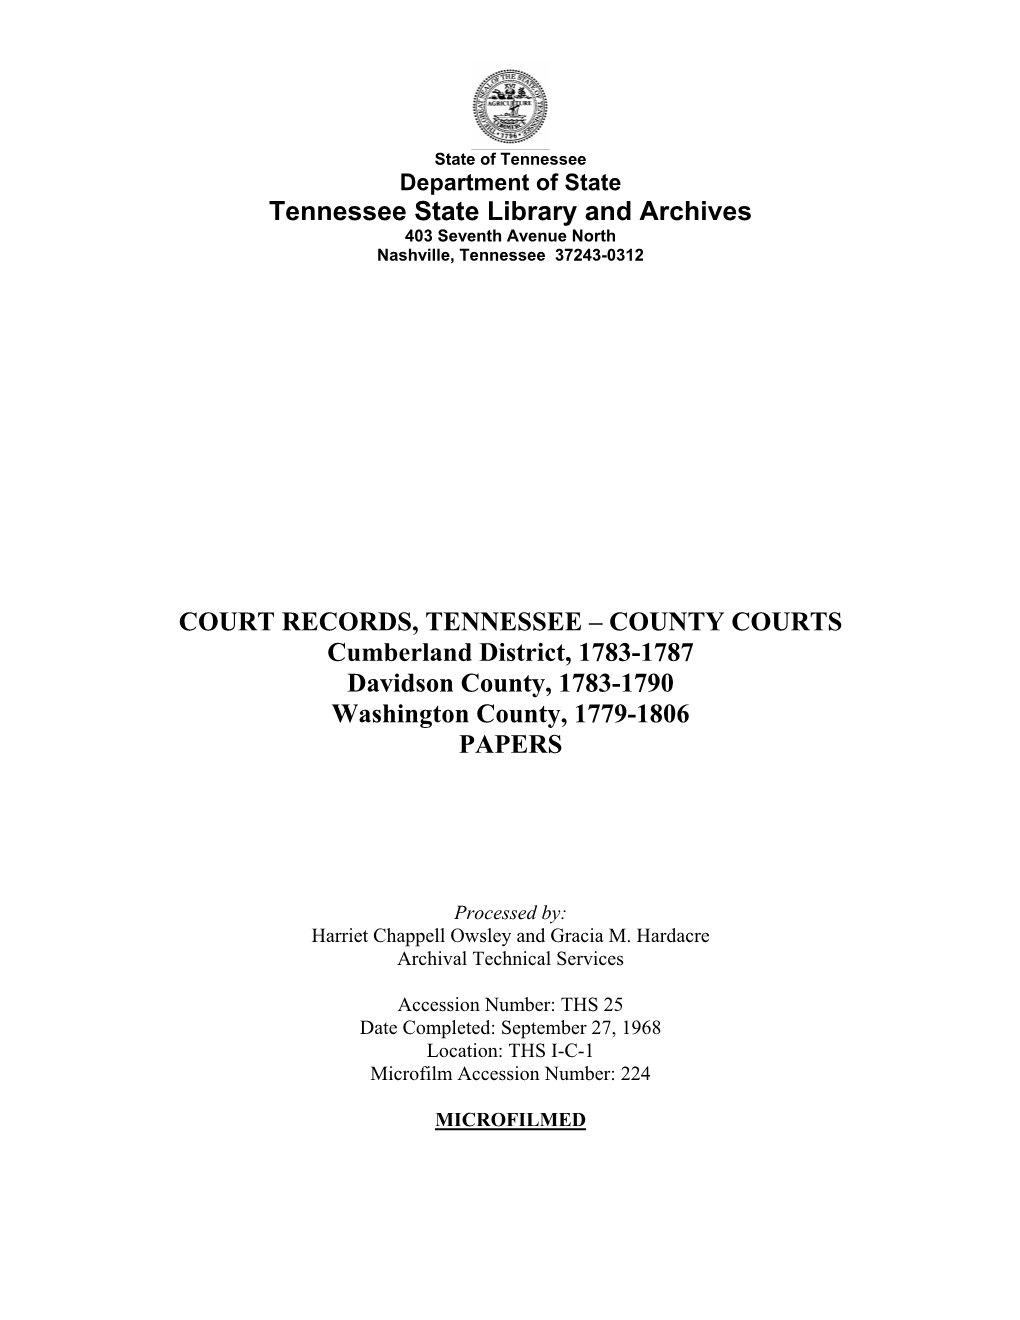 COURT RECORDS, TENNESSEE – COUNTY COURTS Cumberland District, 1783-1787 Davidson County, 1783-1790 Washington County, 1779-1806 PAPERS